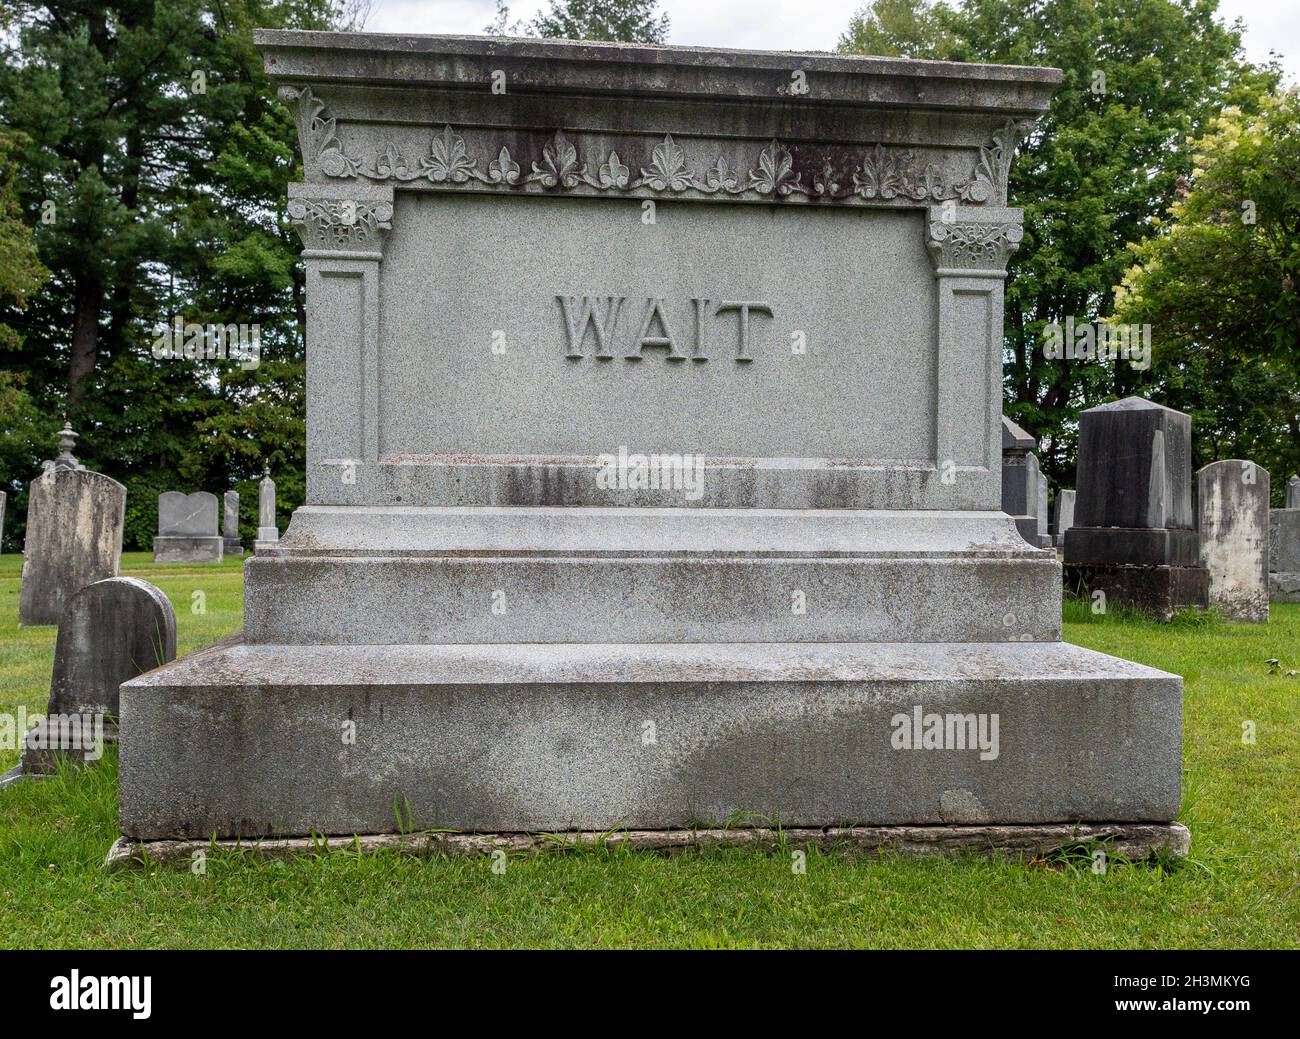 Wait Family Tombstone -- not yet...: A large stone memorial for the WAIT family. Seems to be a message for not being ready to die. Stock Photo